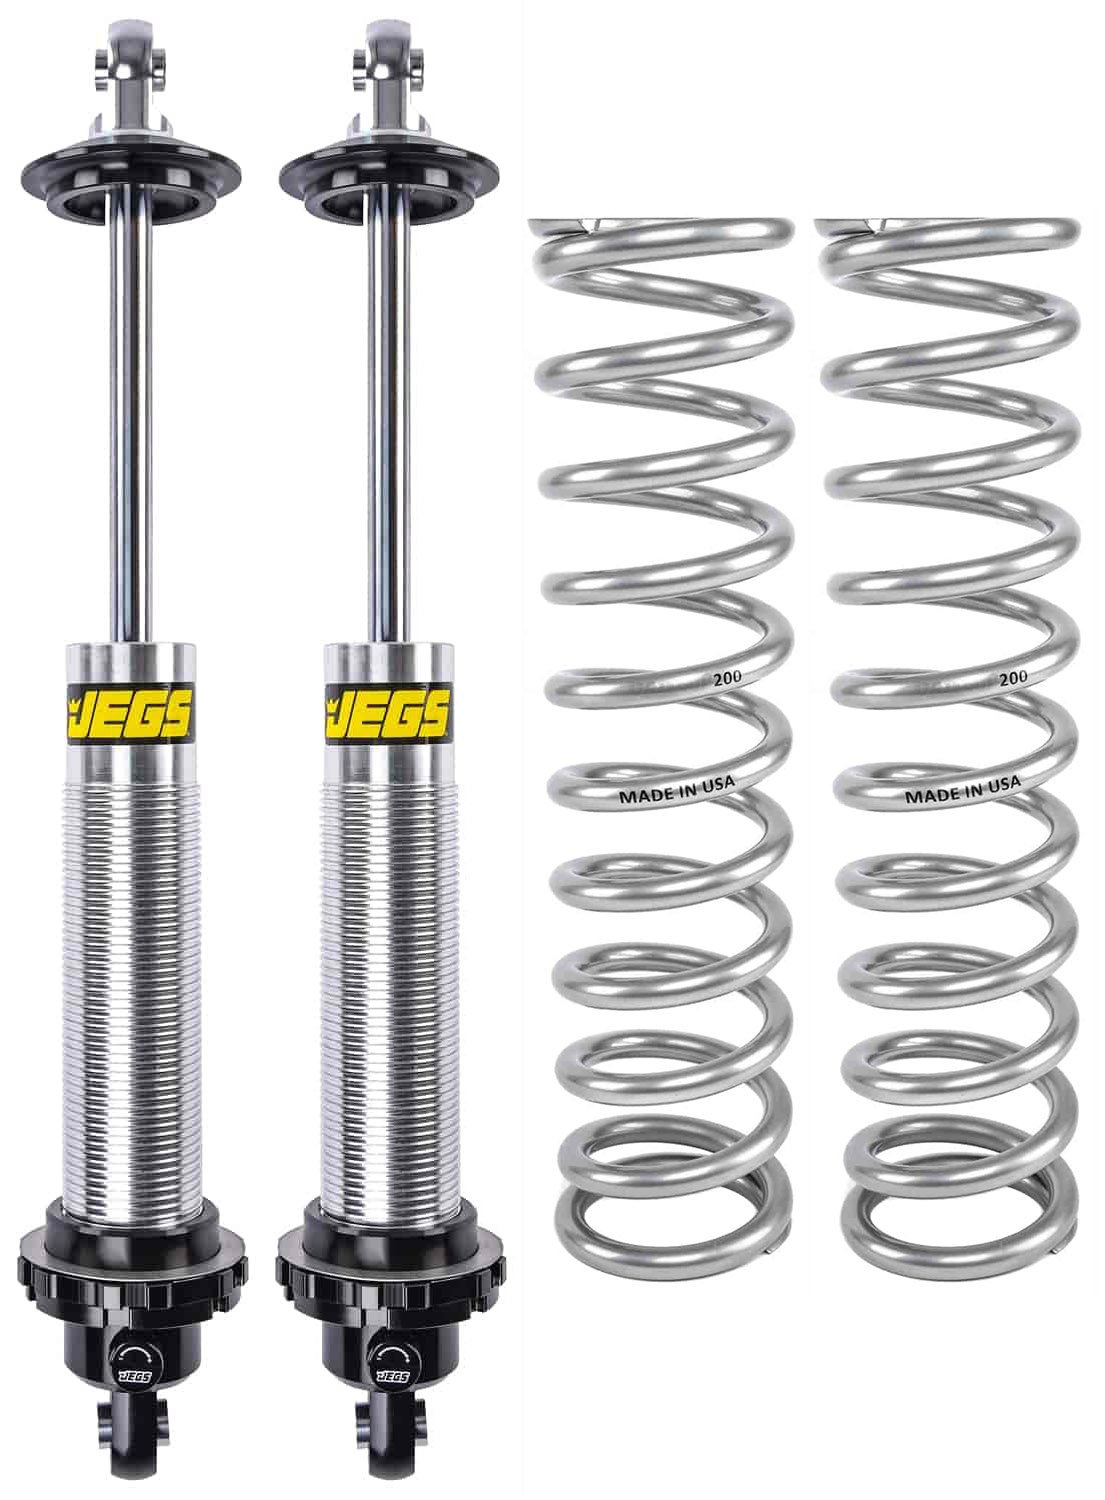 Single Adjustable Coil-Over Shocks and Coil-Over Springs Kit [14 in., 200 lbs./in. Springs]